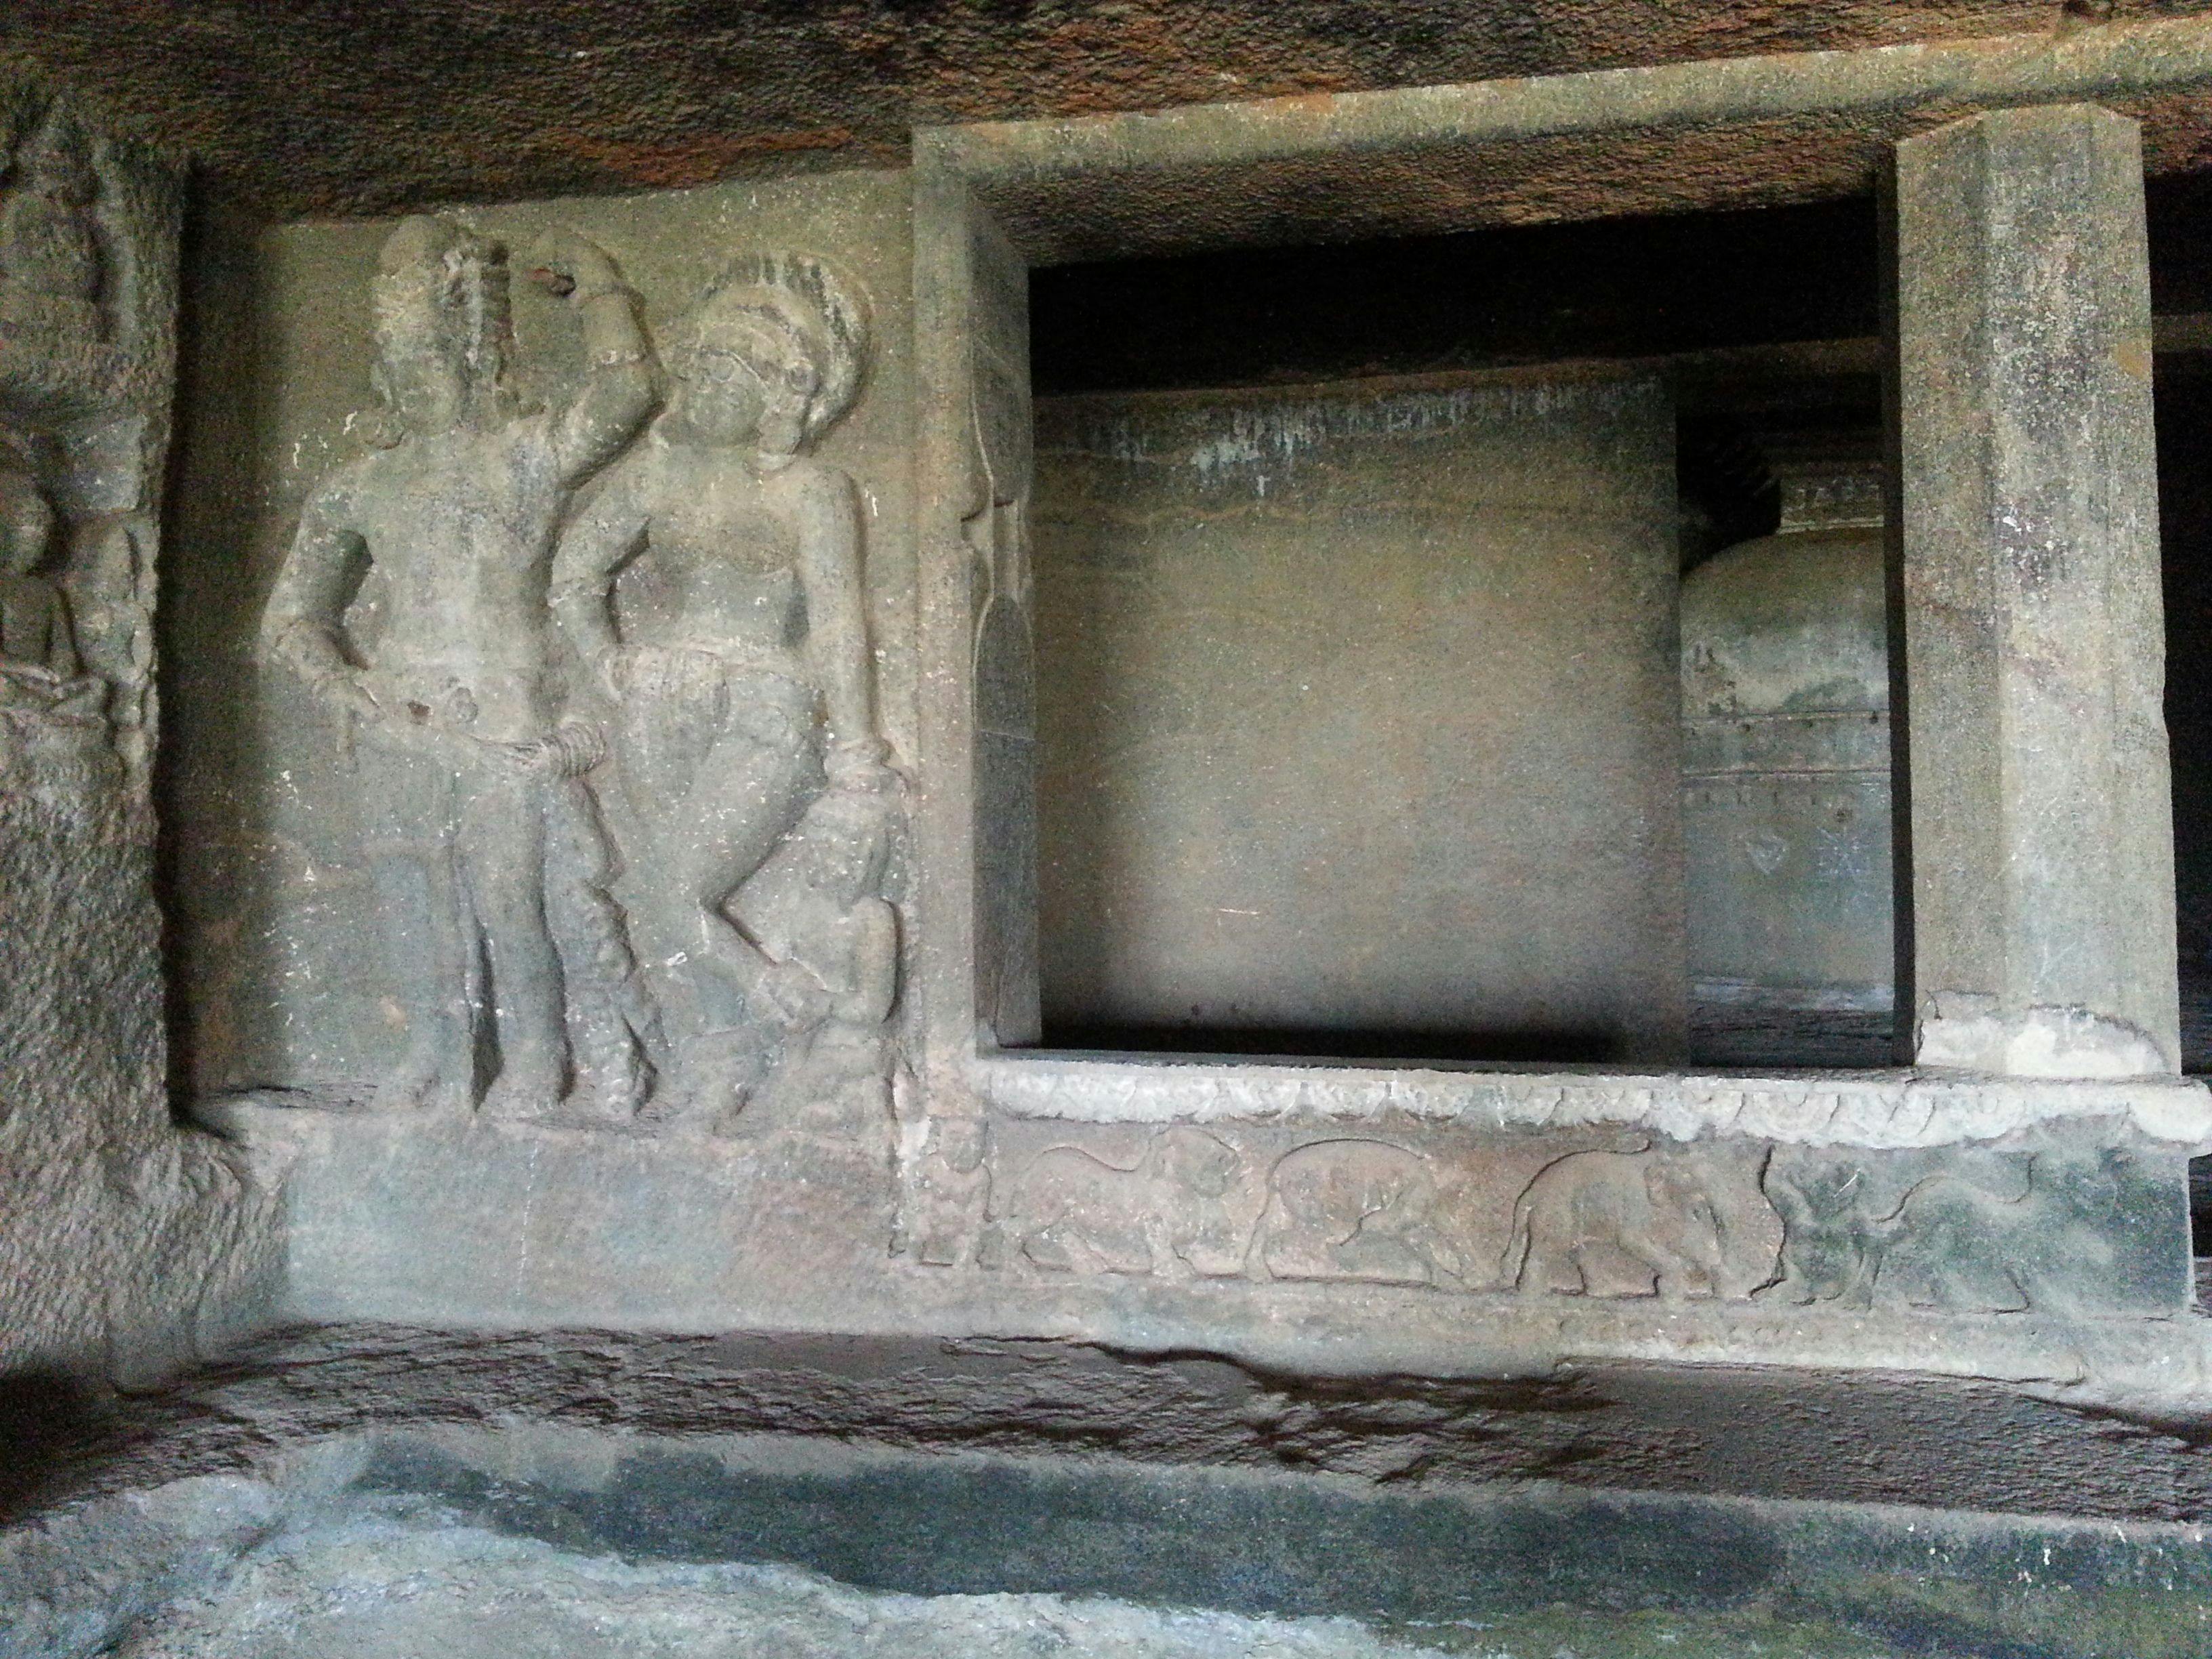 The donor couple at cave no. 6